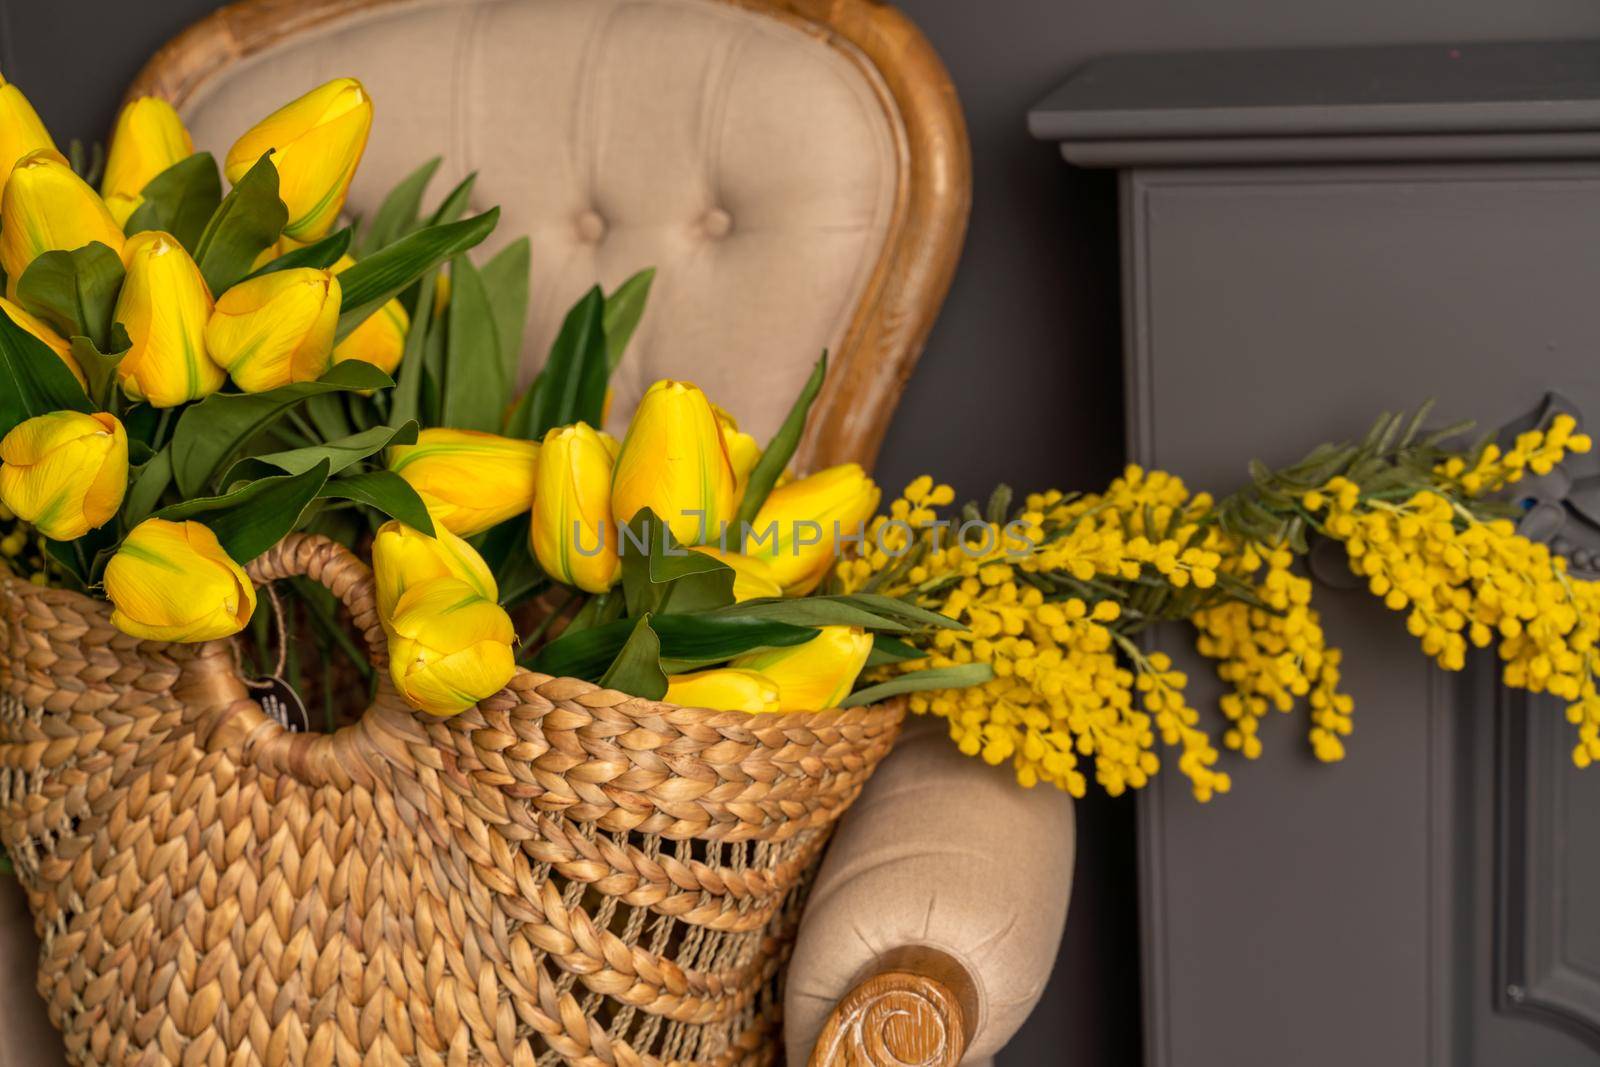 A large bouquet of yellow tulips and a yellow mimosa in a wicker basket. The basket sits on a beige chair against a gray wall. by Matiunina